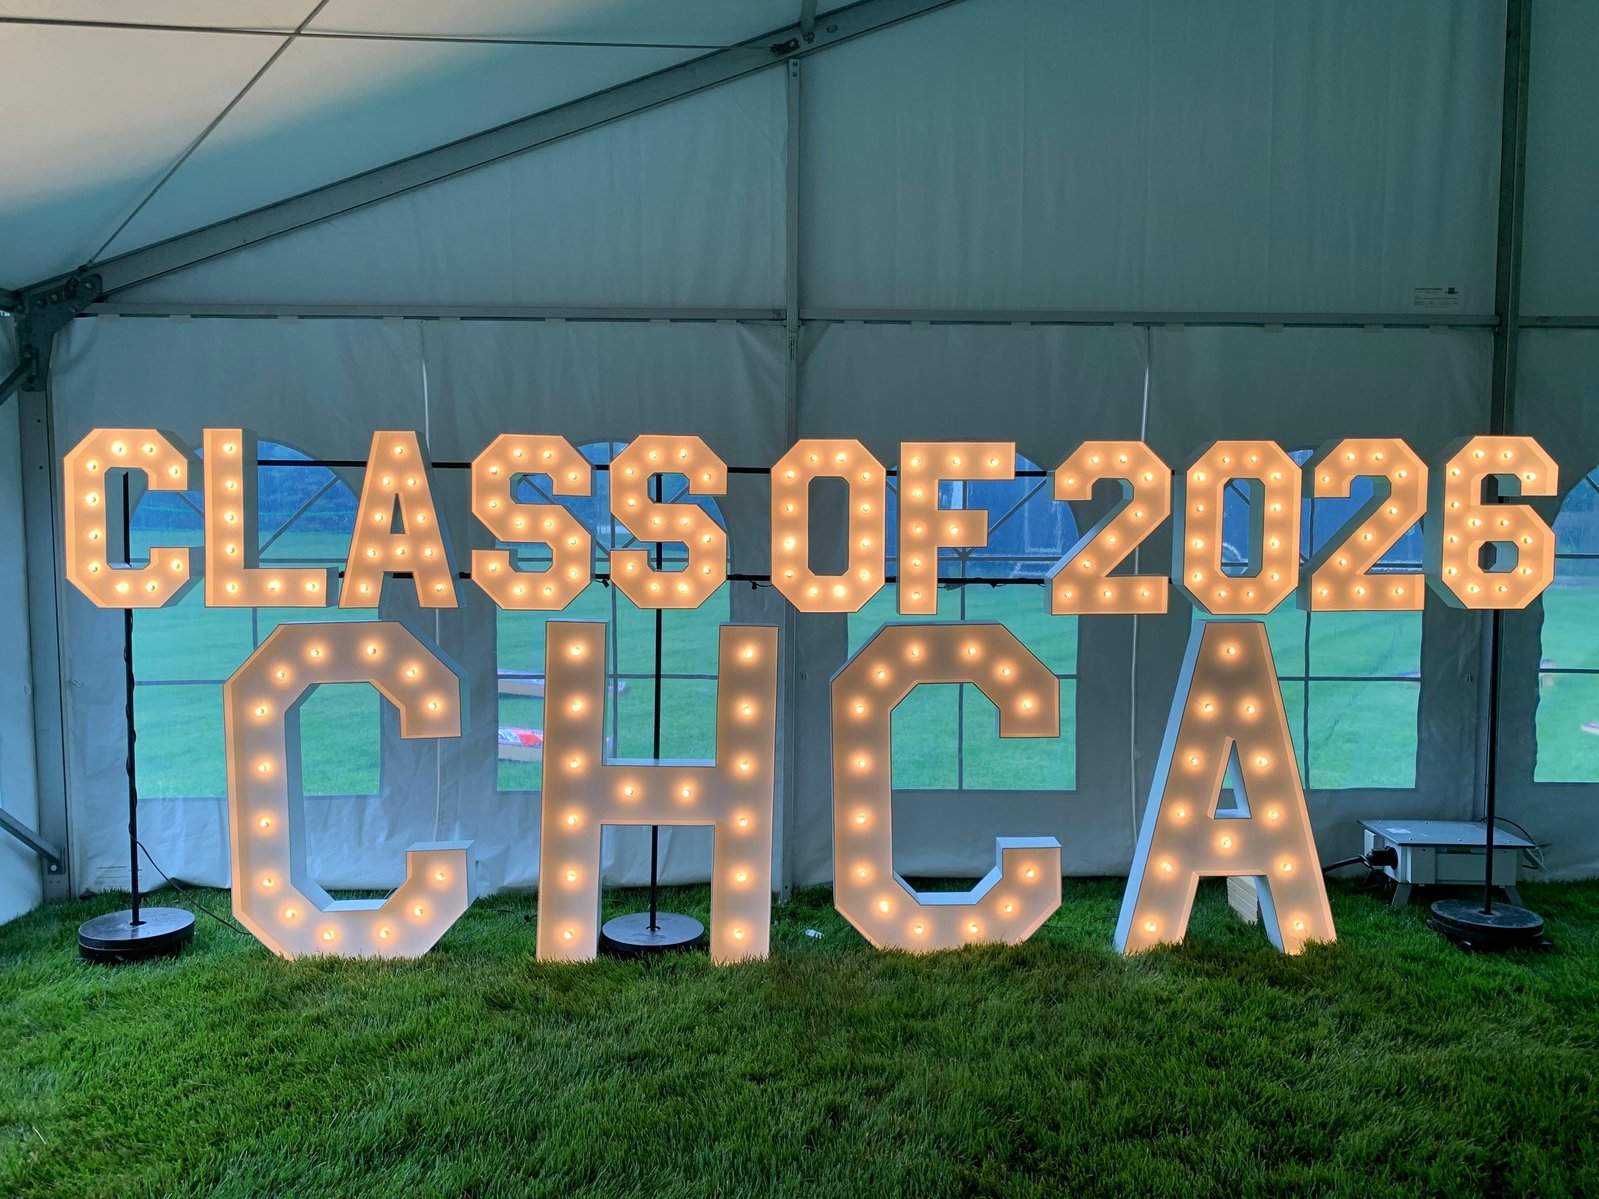 under a white outdoor event tent resting on green grass are large light up marquee letters stacked atop each other for a graduation party